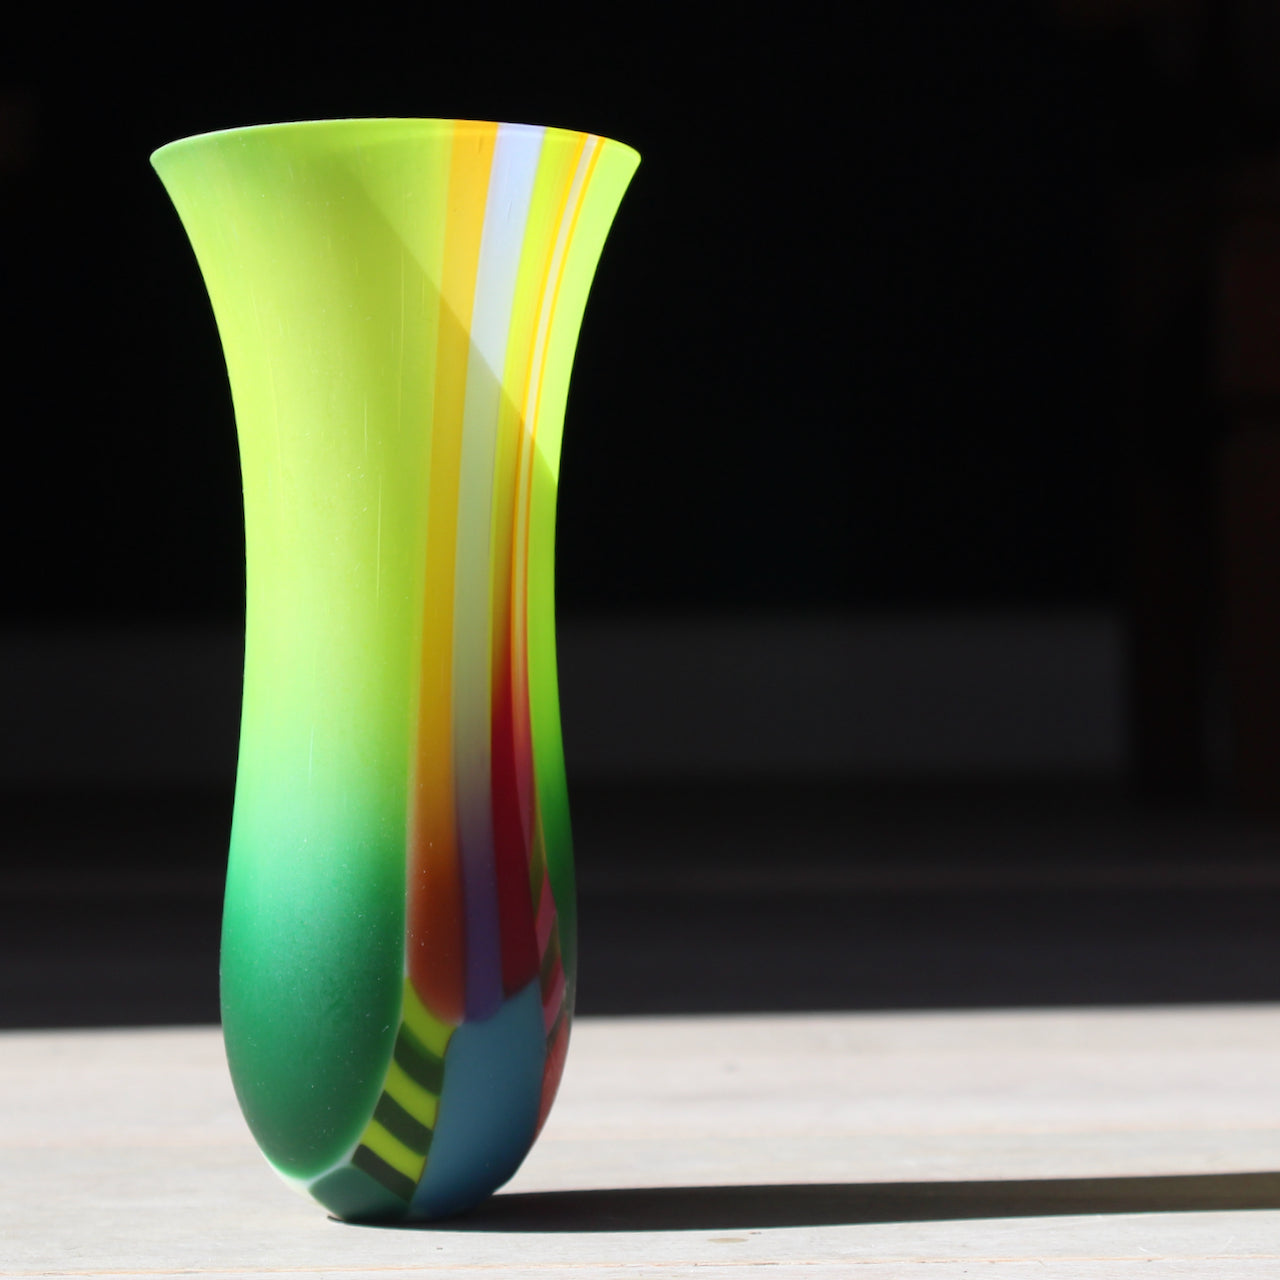 Narrow vibrant coloured glass vase by artist Ruth Shelley in tones of green, yellow, blue and orange.